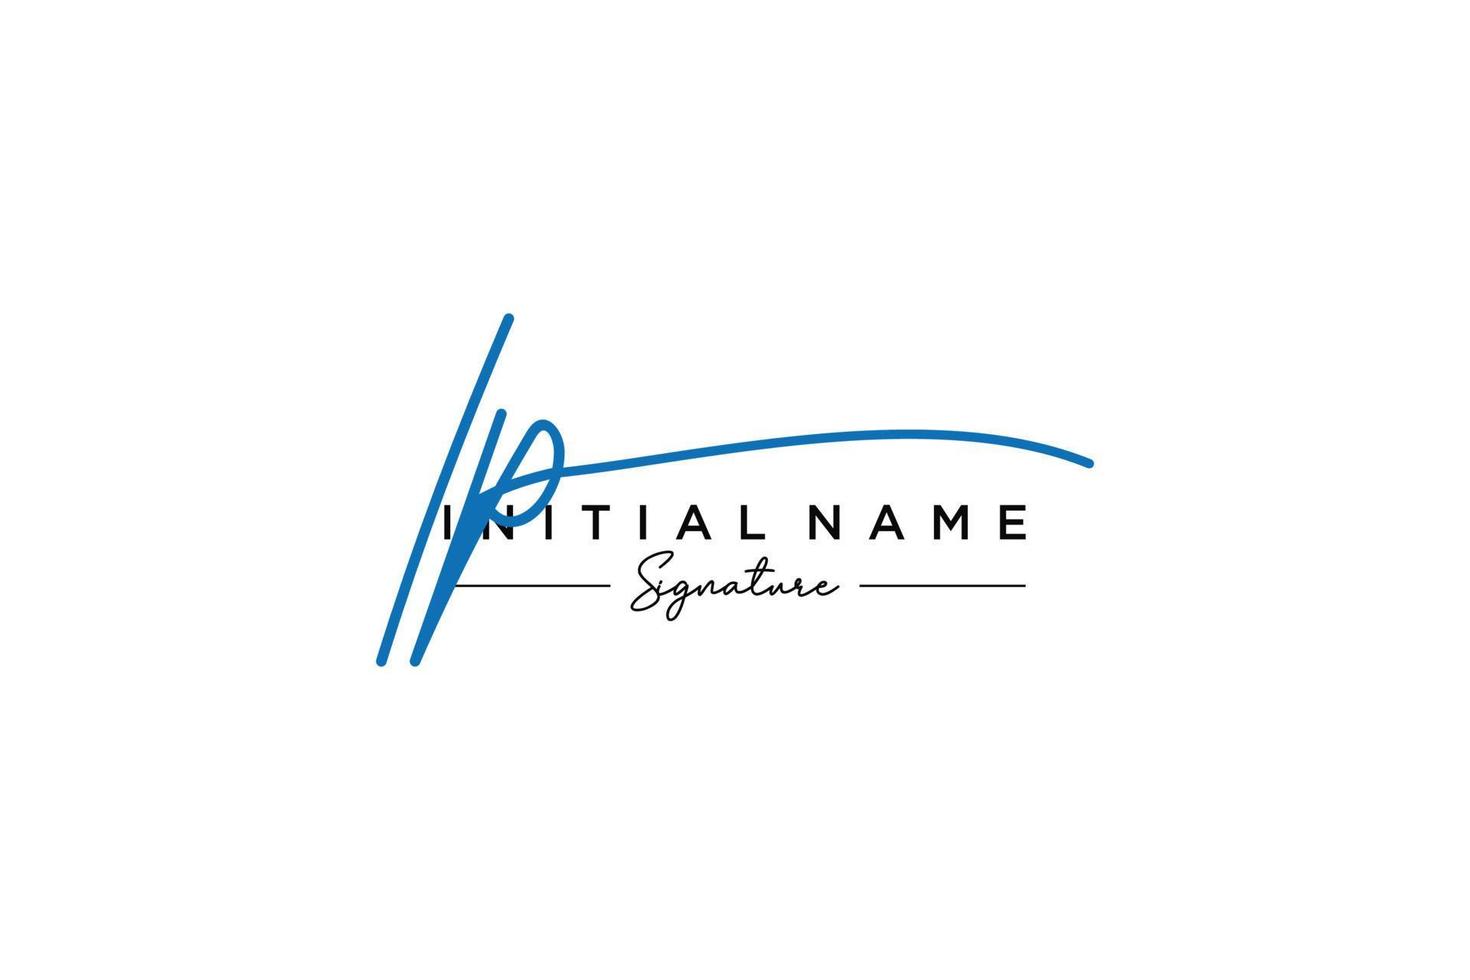 Initial IP signature logo template vector. Hand drawn Calligraphy lettering Vector illustration.